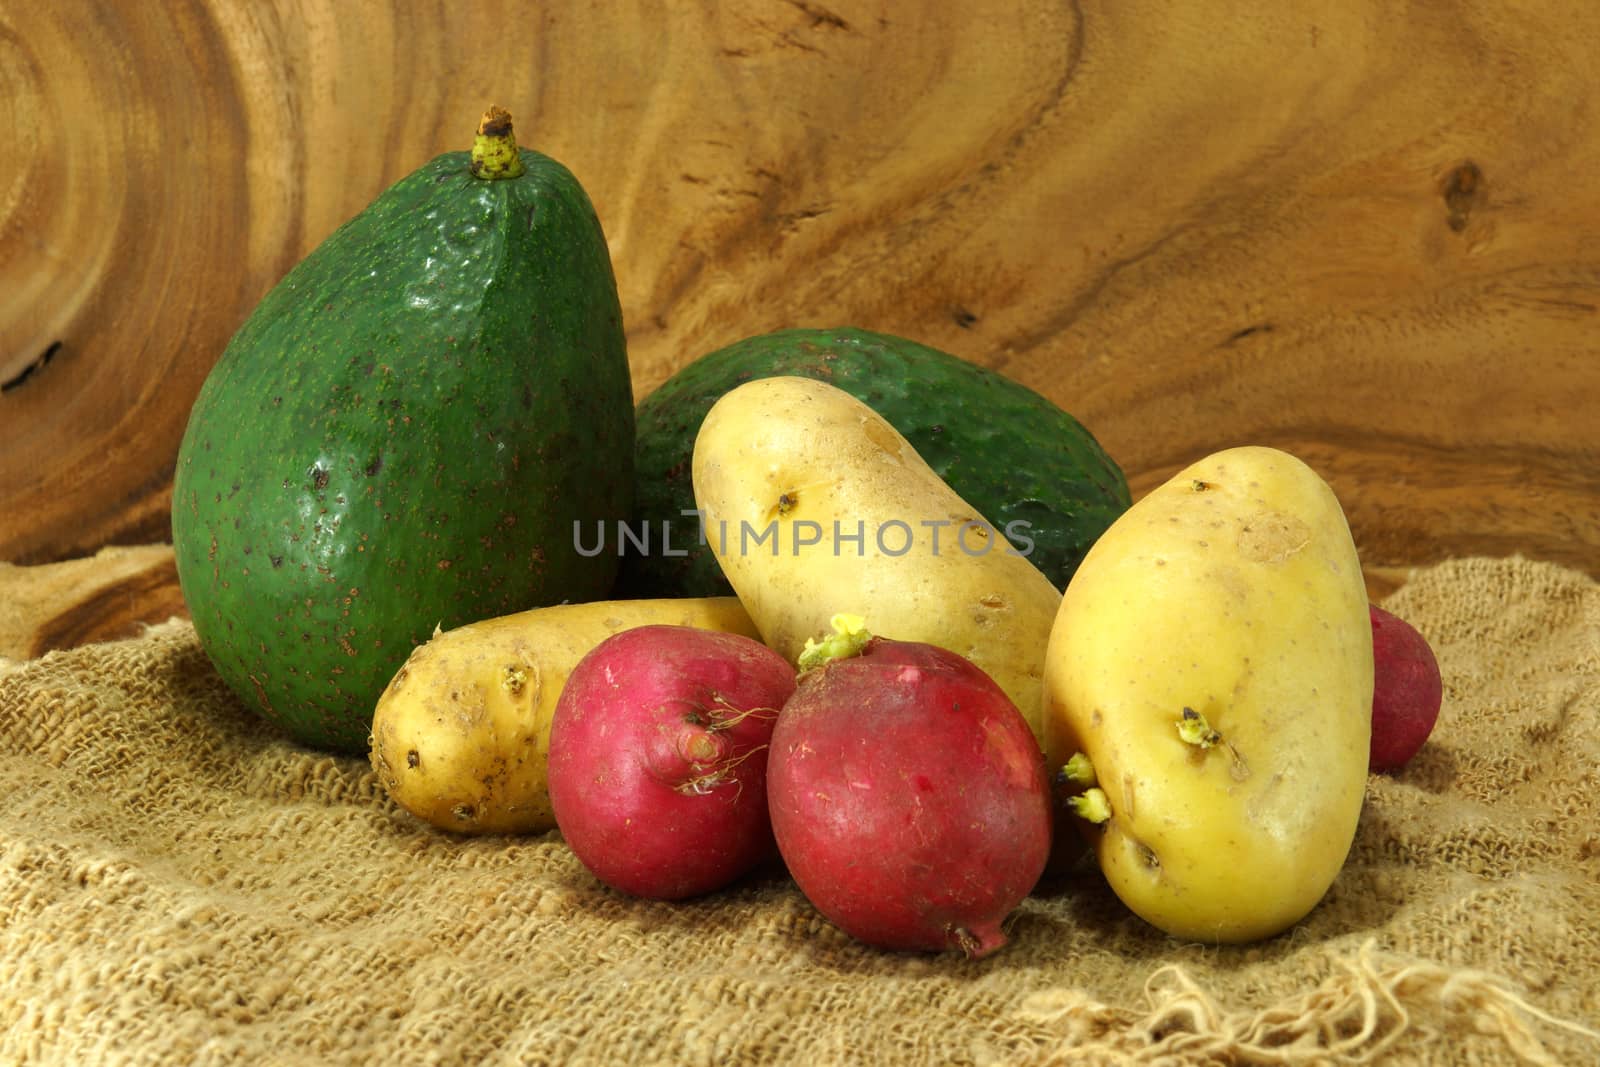 Vegetables and fruits on wooden background.